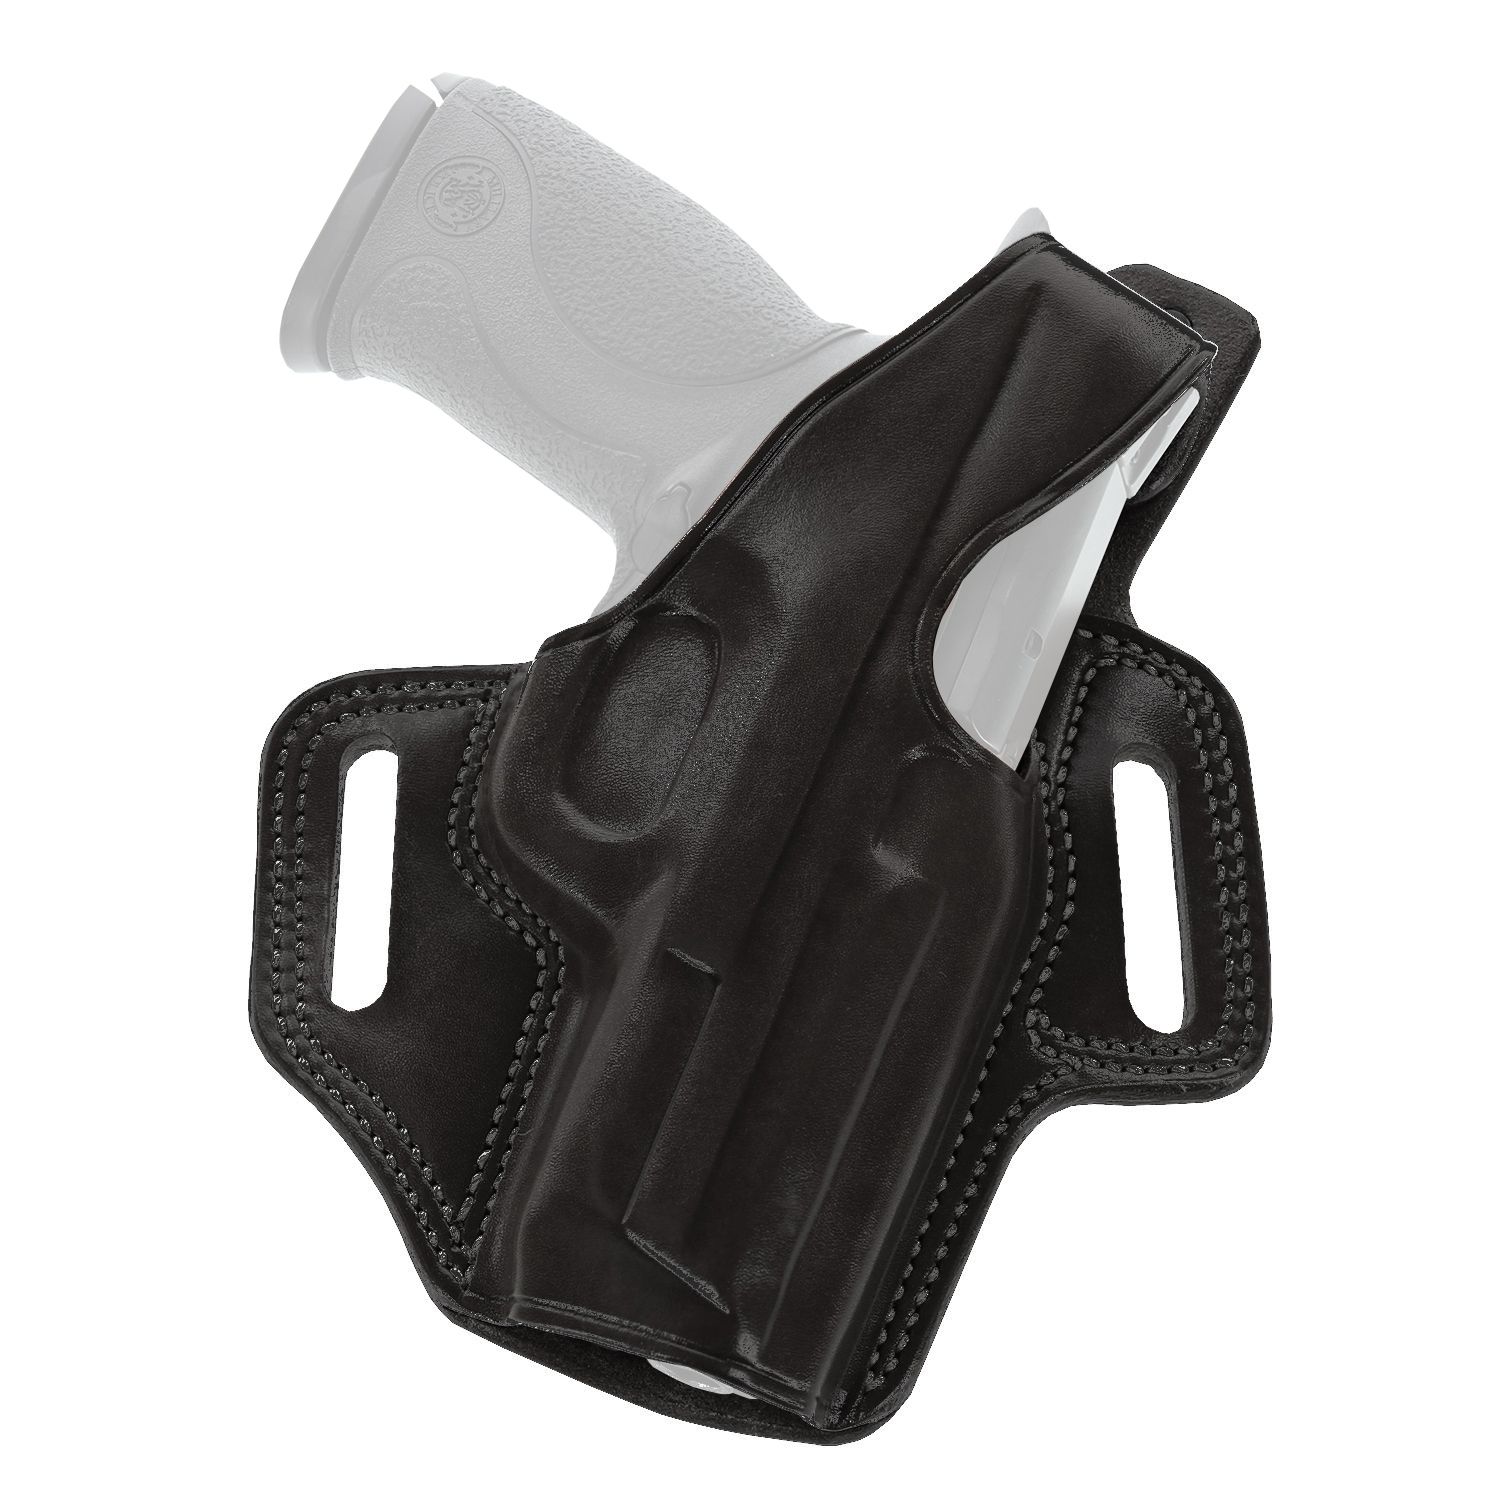 Galco Fletch Concealment Paddle Holster Right Hand Black - Colt 4 1/: FL266RB